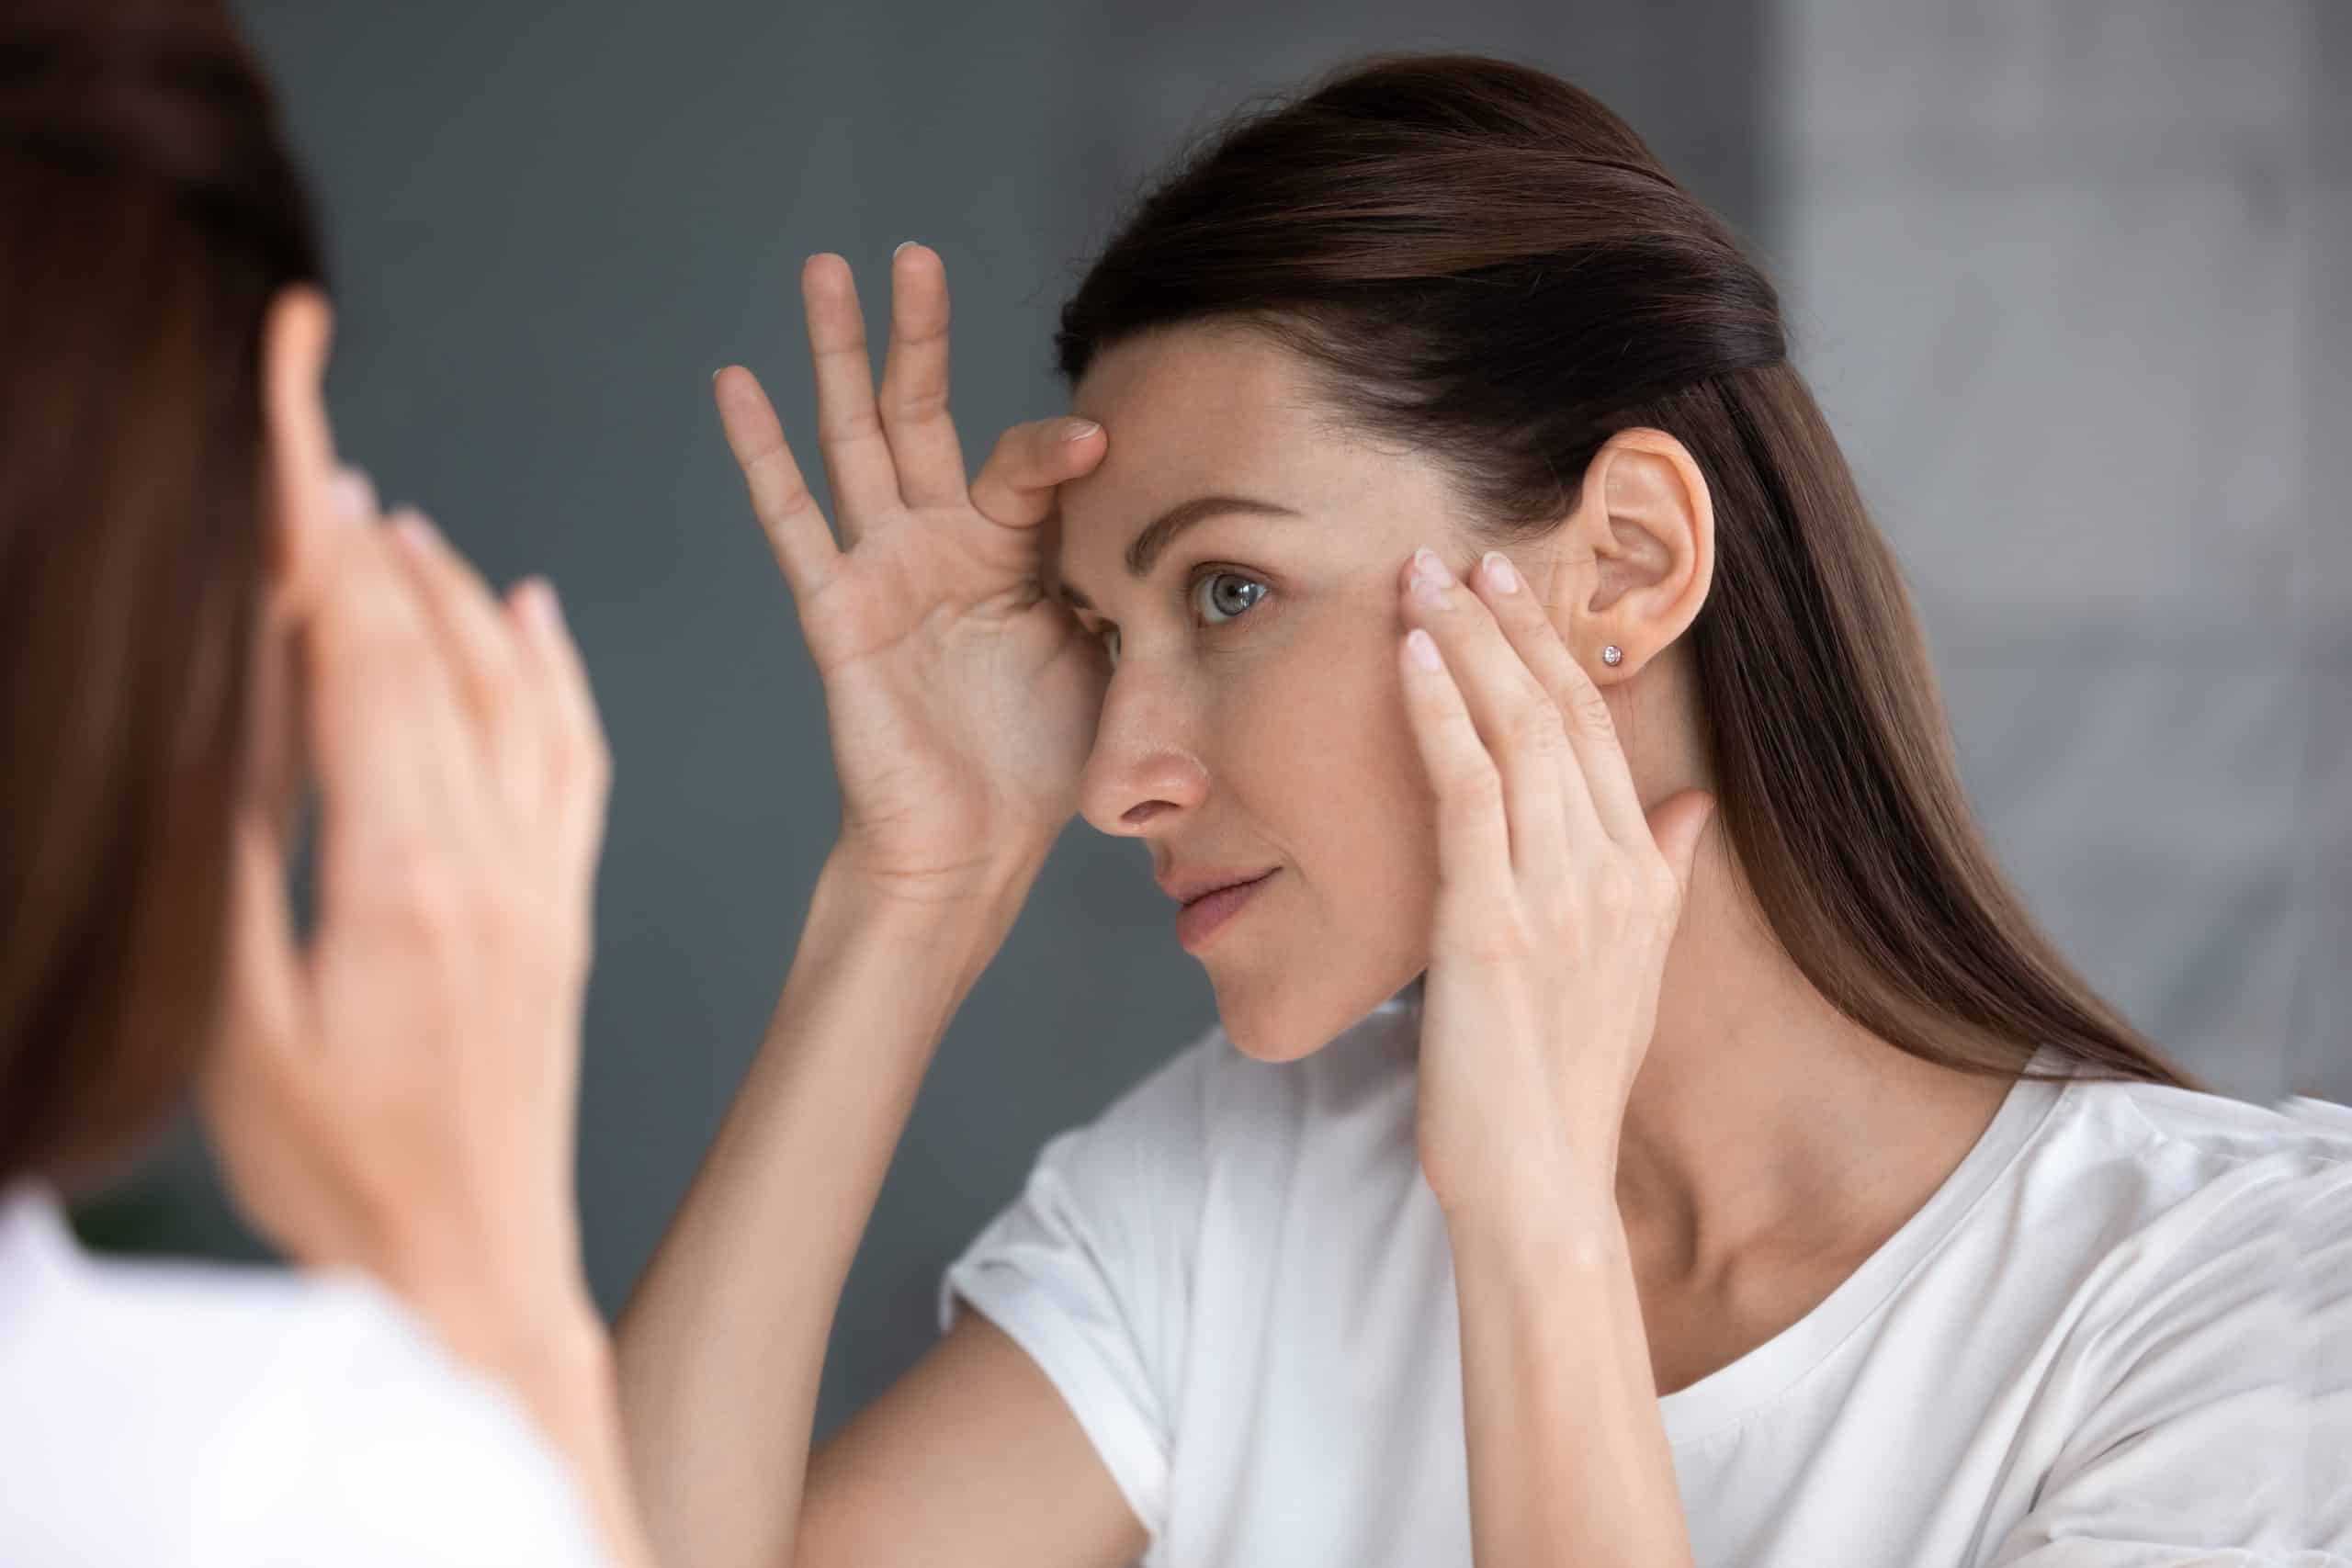 Satisfied woman looking in mirror check face after beauty treatment